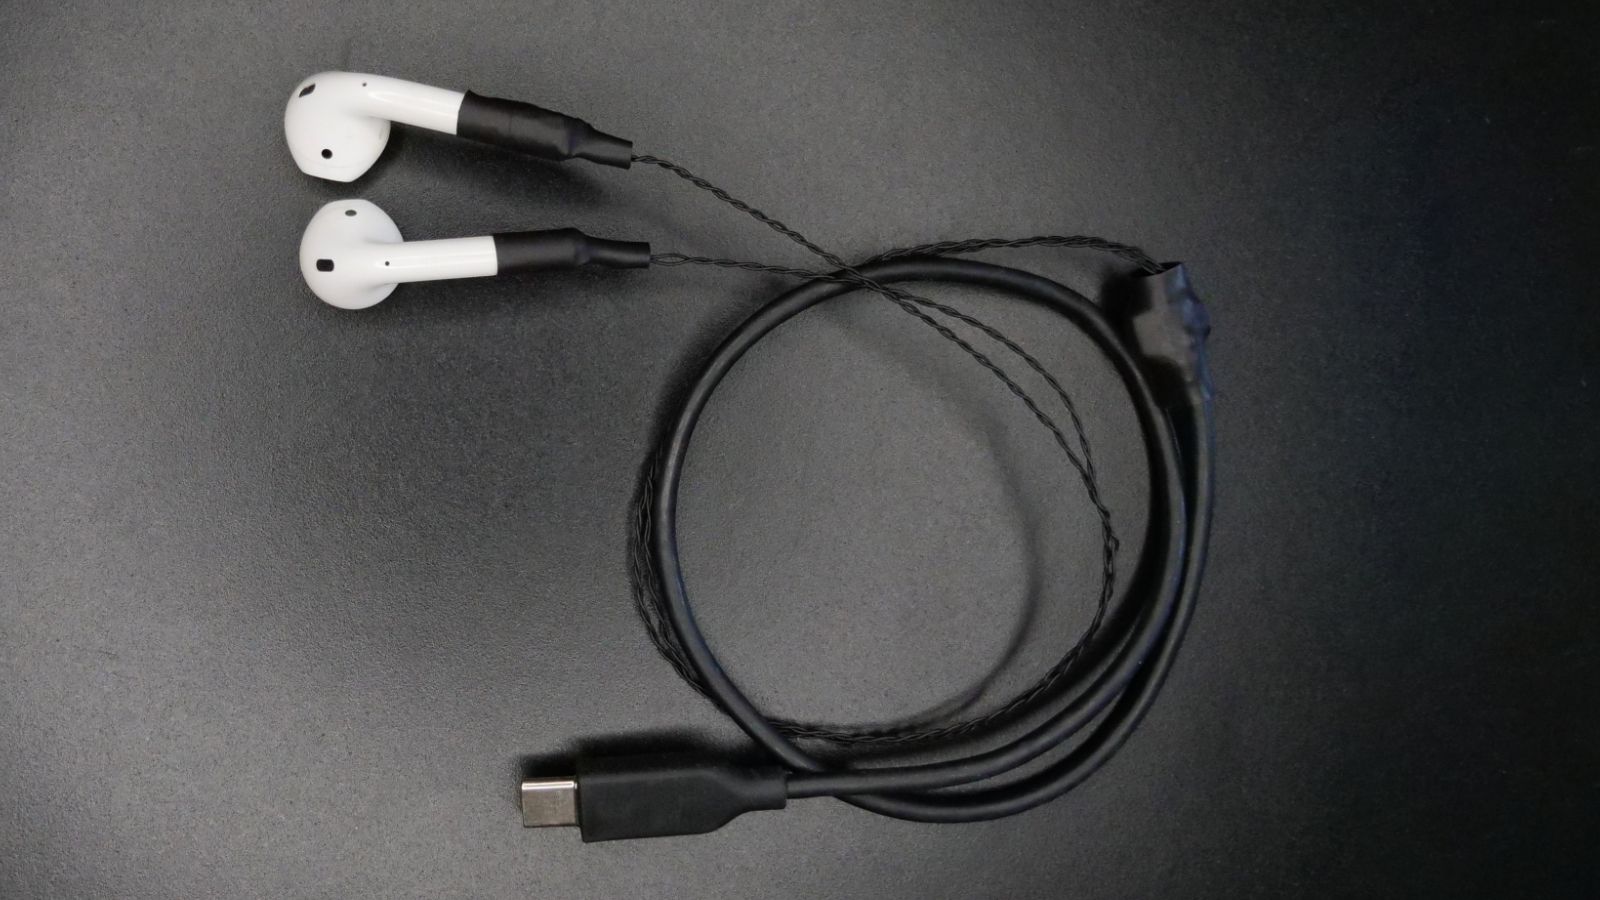 Engineer Brings Wires and USB-C Connector to AirPods - macrumors.com